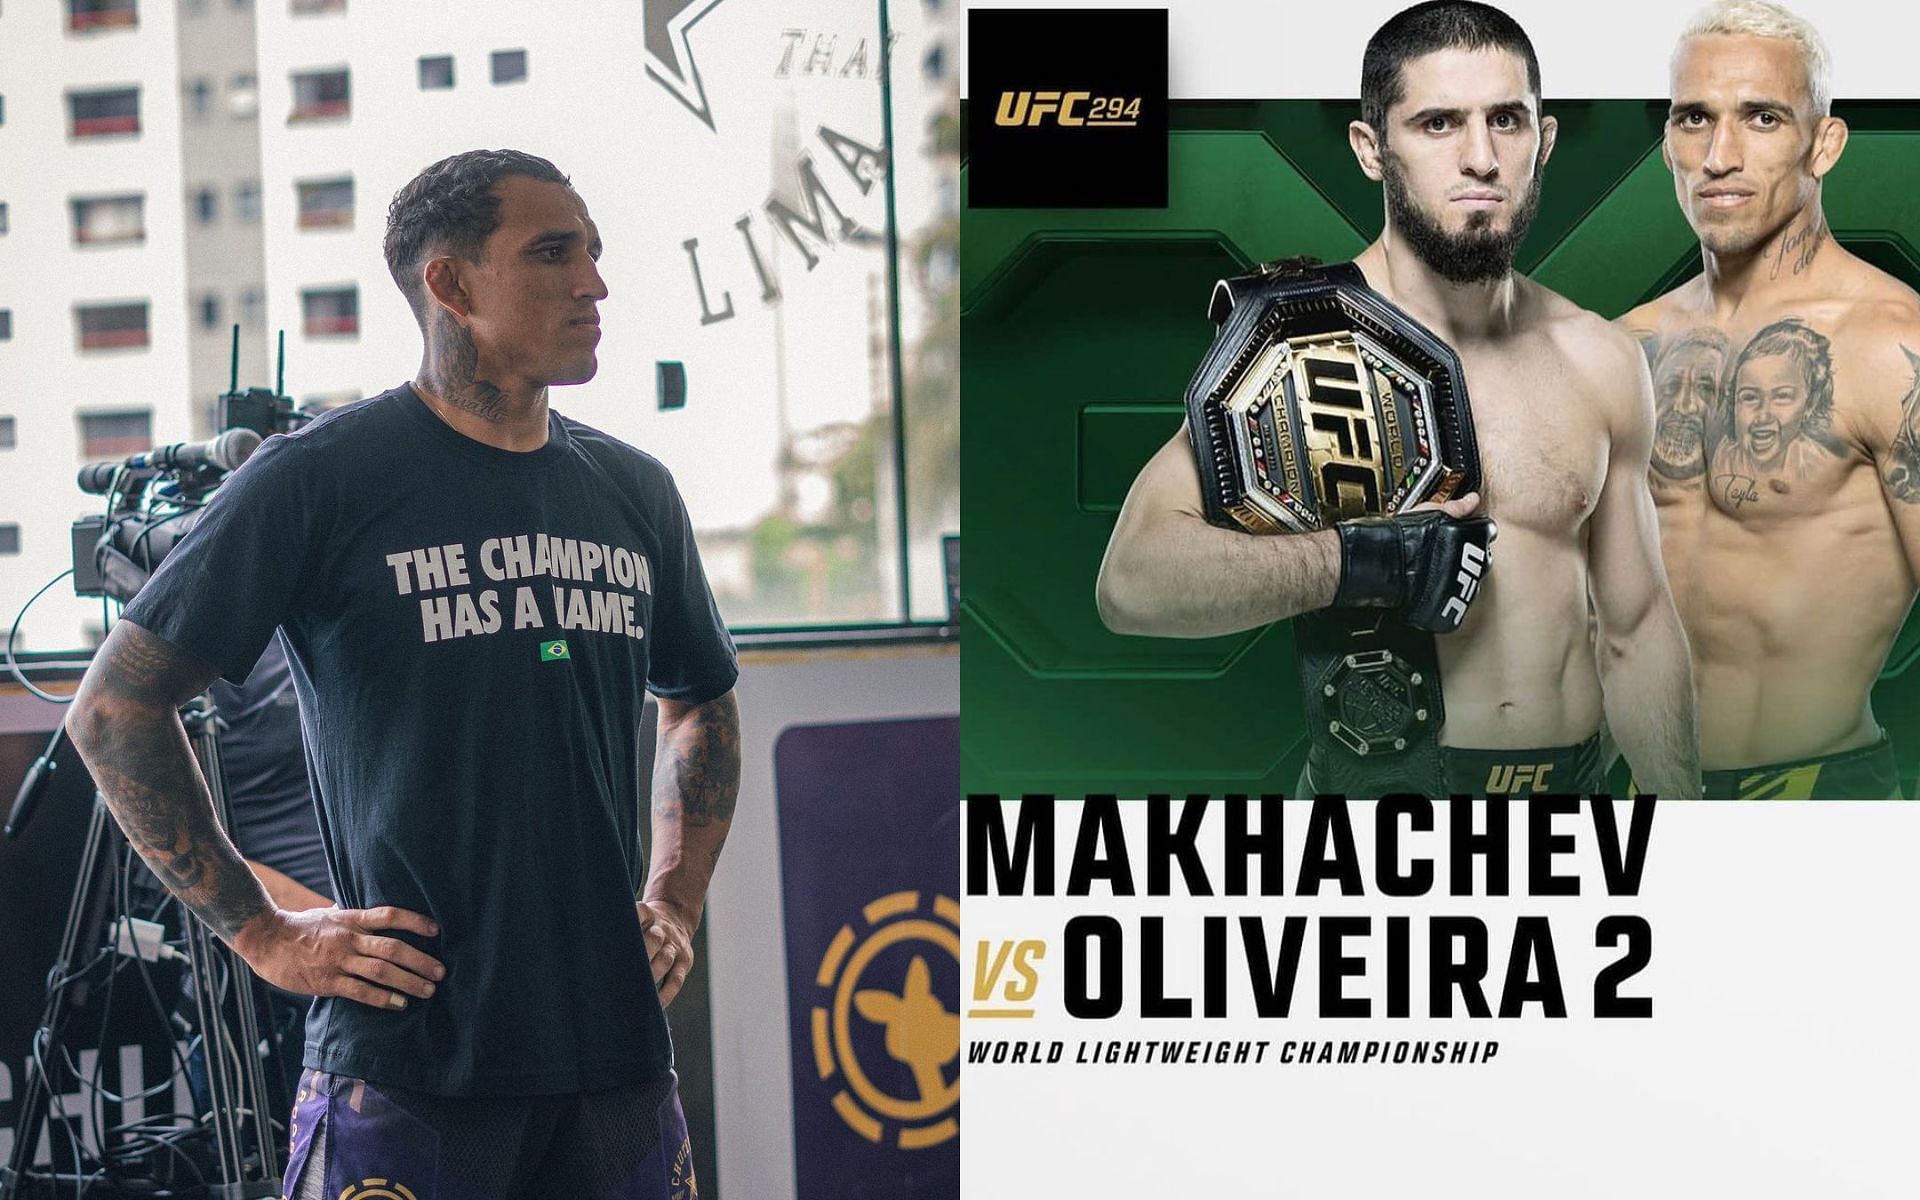 Charles Oliveira (left) and Fight poster for Makhachev vs Oliveira 2 (right) (Image credits @charlesdobronxs on Instagram)